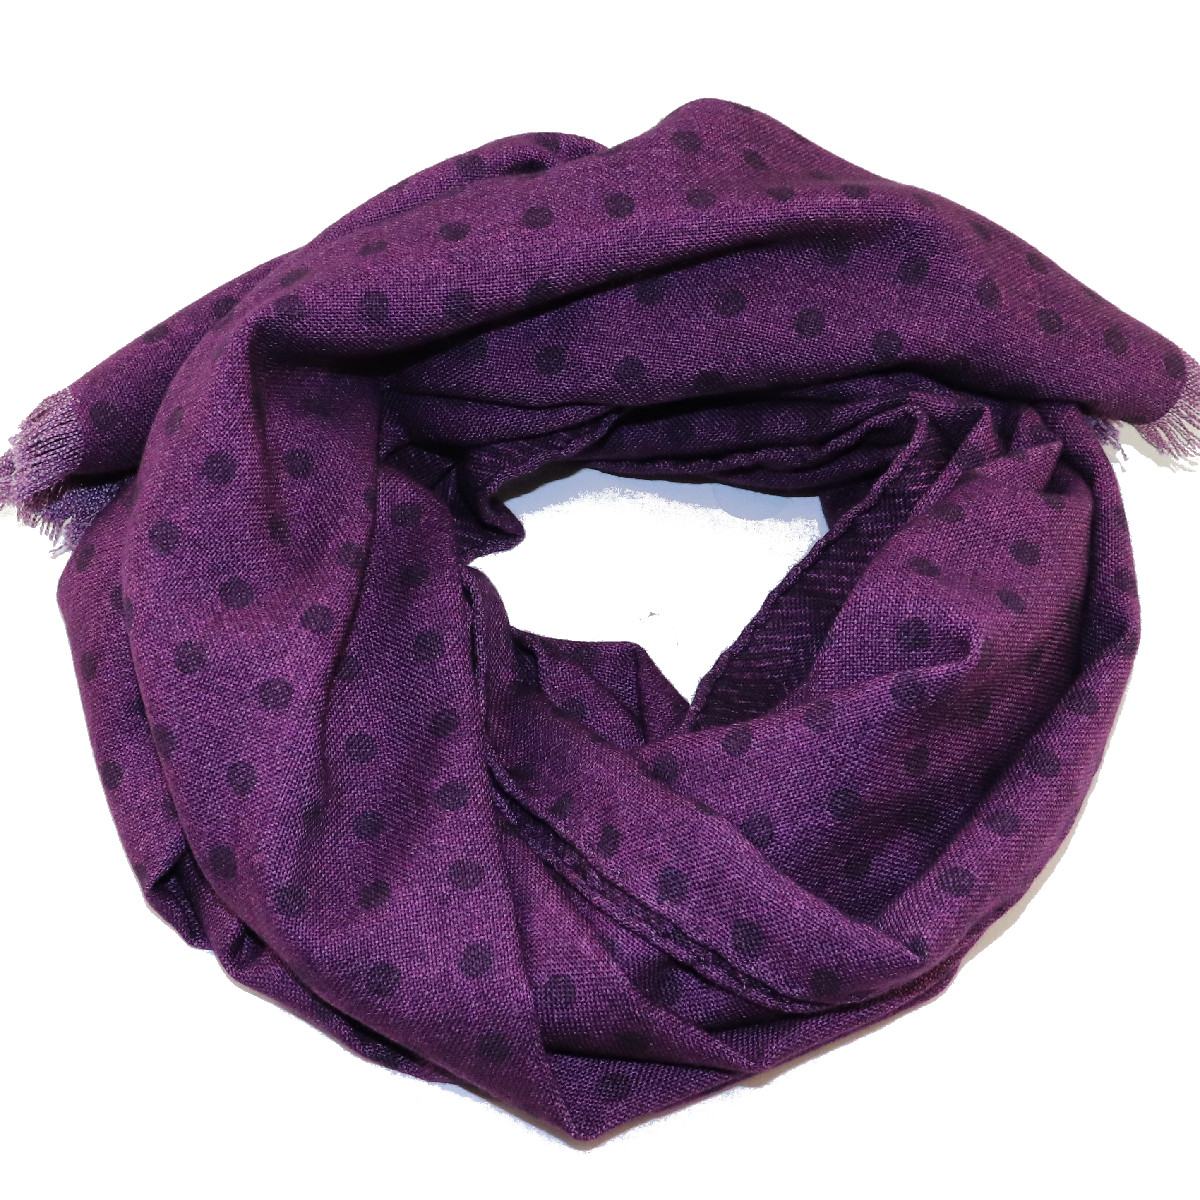 The latest design style Scarves for Women Luxury Collection, lv